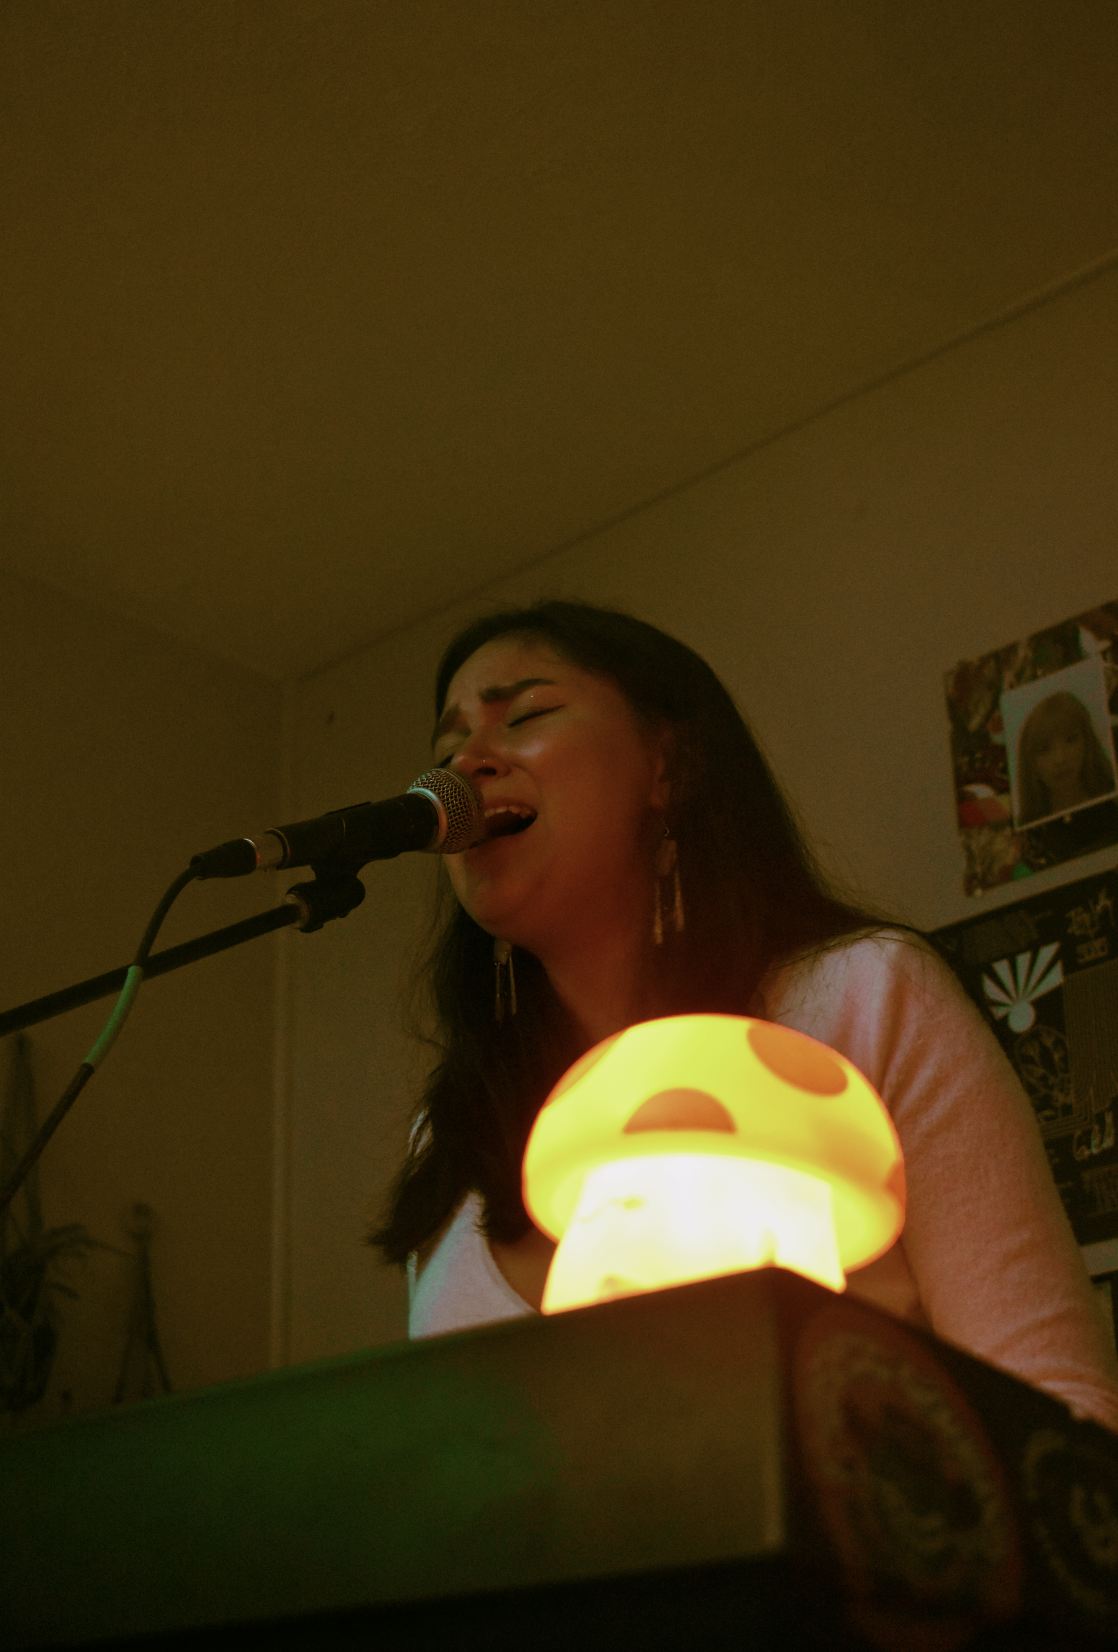  Alexi sings a song about her perky chihuahua in the company of a mushroom light.  Photo by Olivia Cagle  